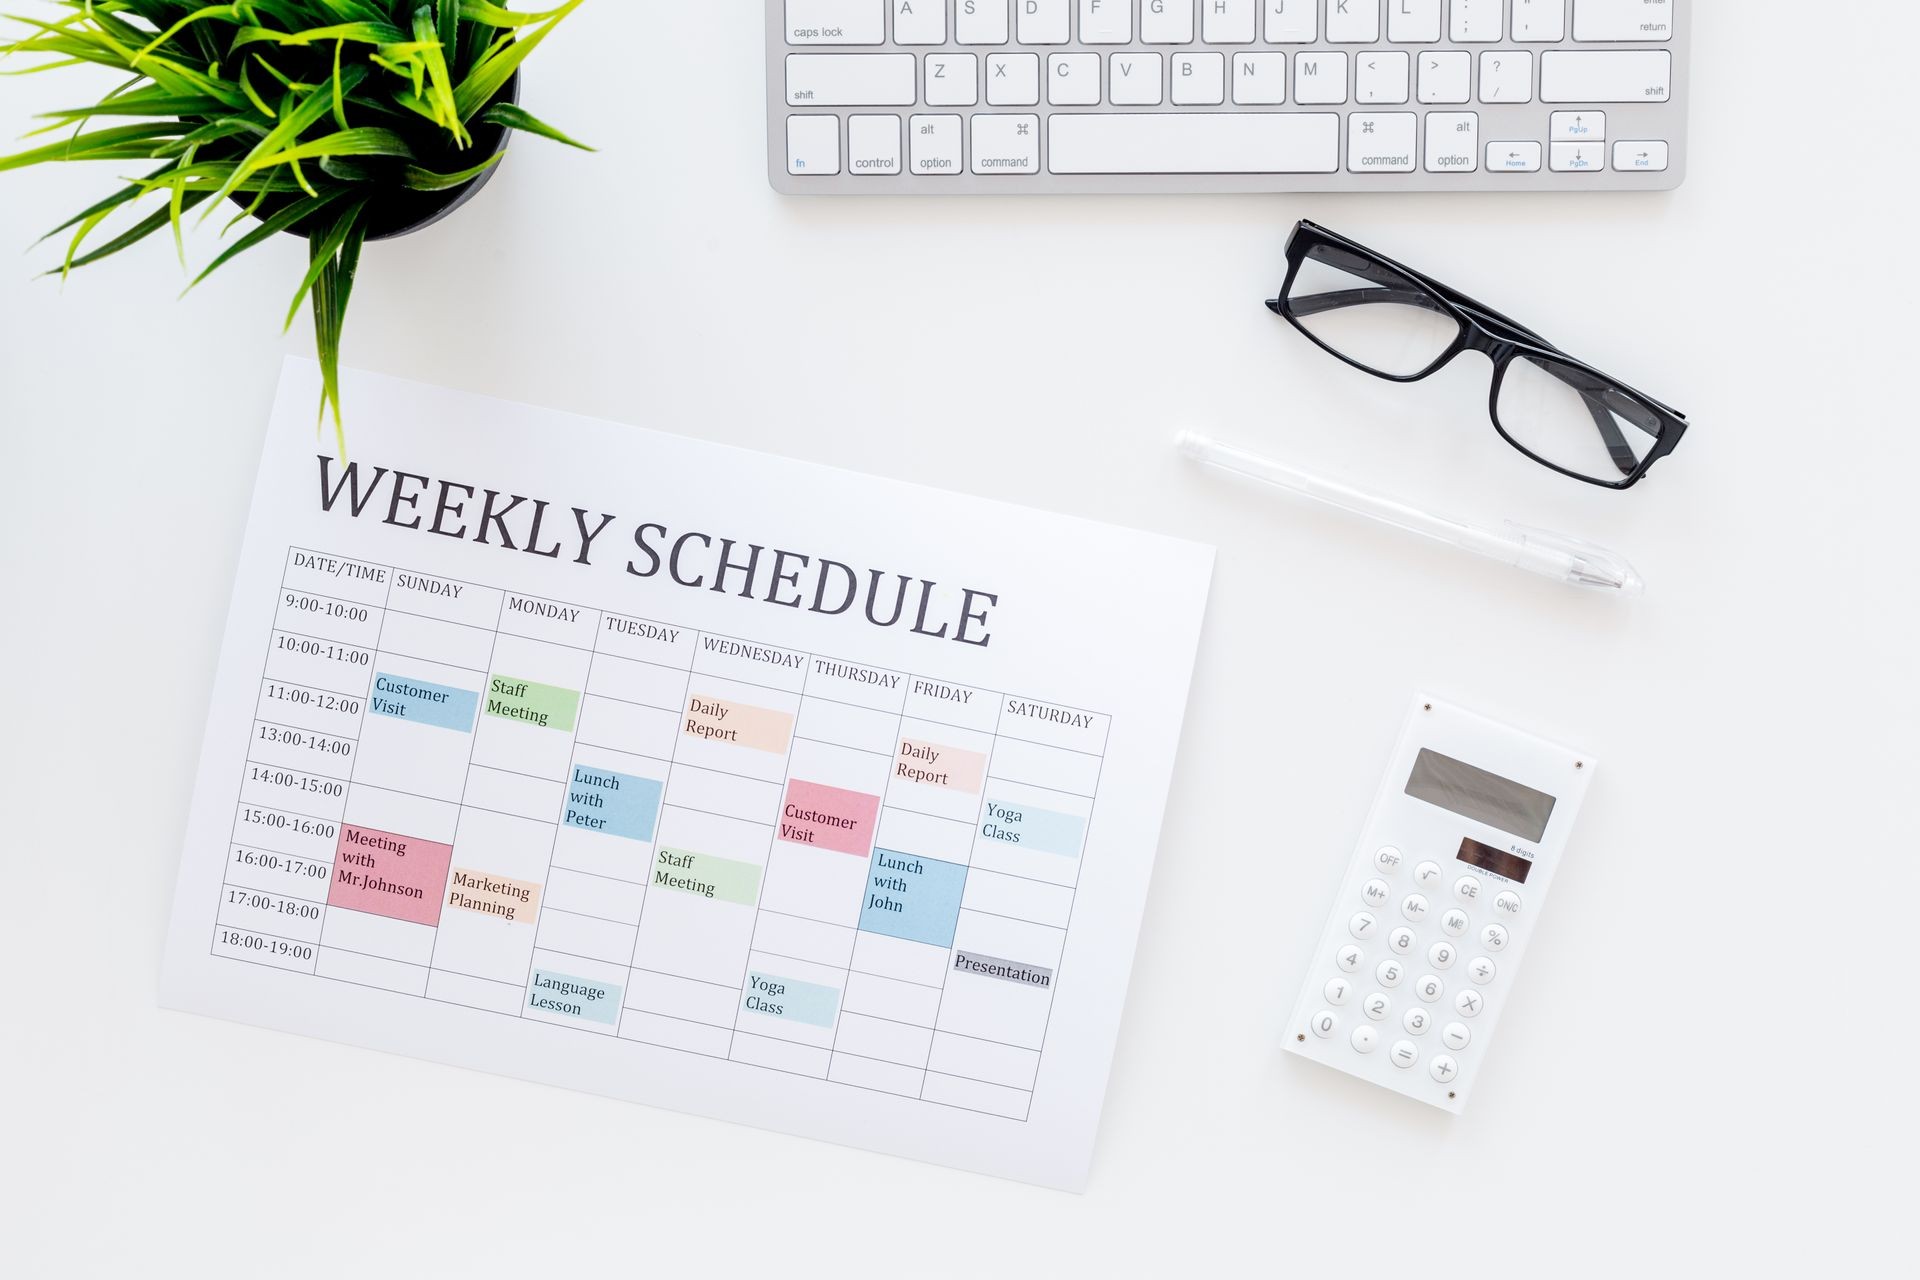 Weekly schedule of manager, office worker, pr specialist or marketing expert. Table with multicolored blocks on white office desk with computer, glasses, calculator top view